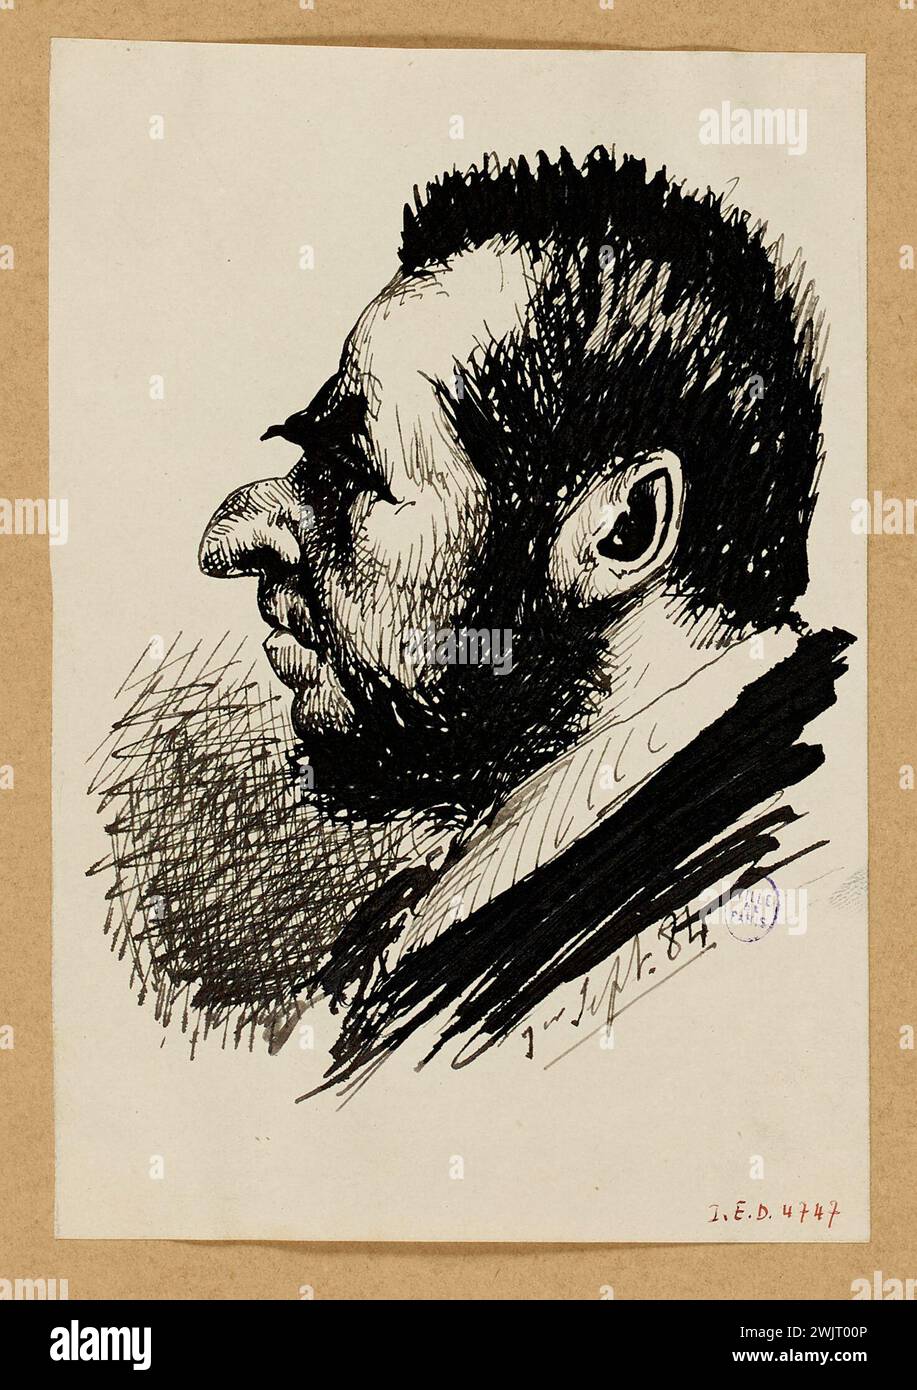 Mounet-Sully, Jean-Sully Mounet dit (n.1841-02-27-D.1916-03-01), portrait executed during a meeting of the reading committee of the Comédie Française. (Faithful title), 1884-09-01. Carnavalet museum, history of Paris. Stock Photo